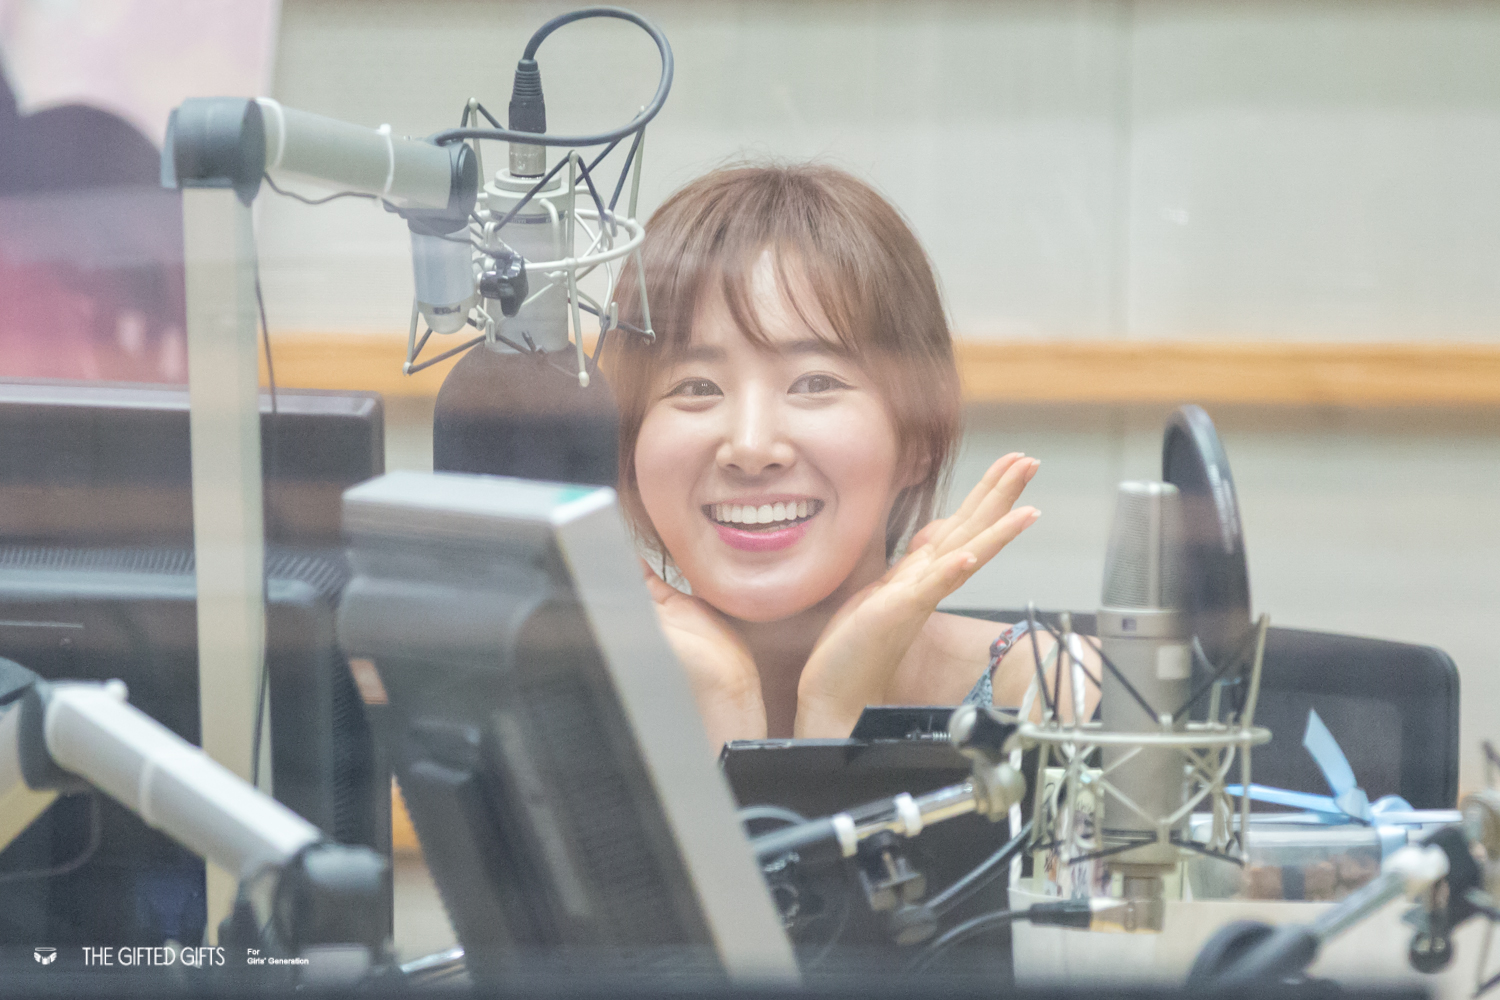 160626 Kiss the Radio 유리 by TheGiftedGifts bittersoursweet (15).jpg